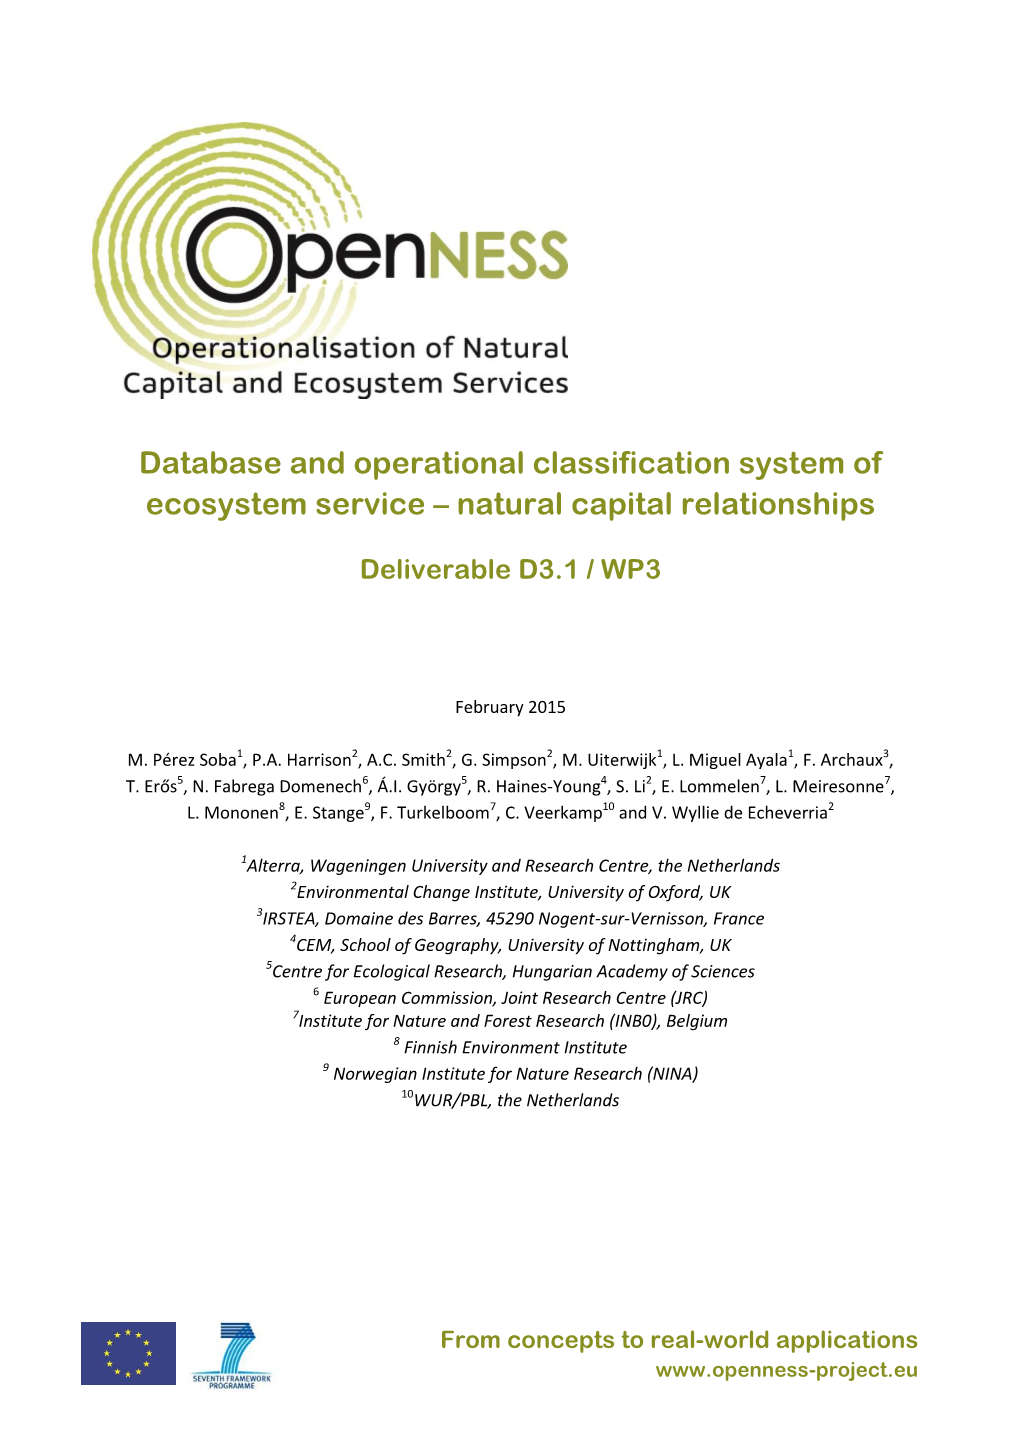 Database and Operational Classification System of Ecosystem Service – Natural Capital Relationships